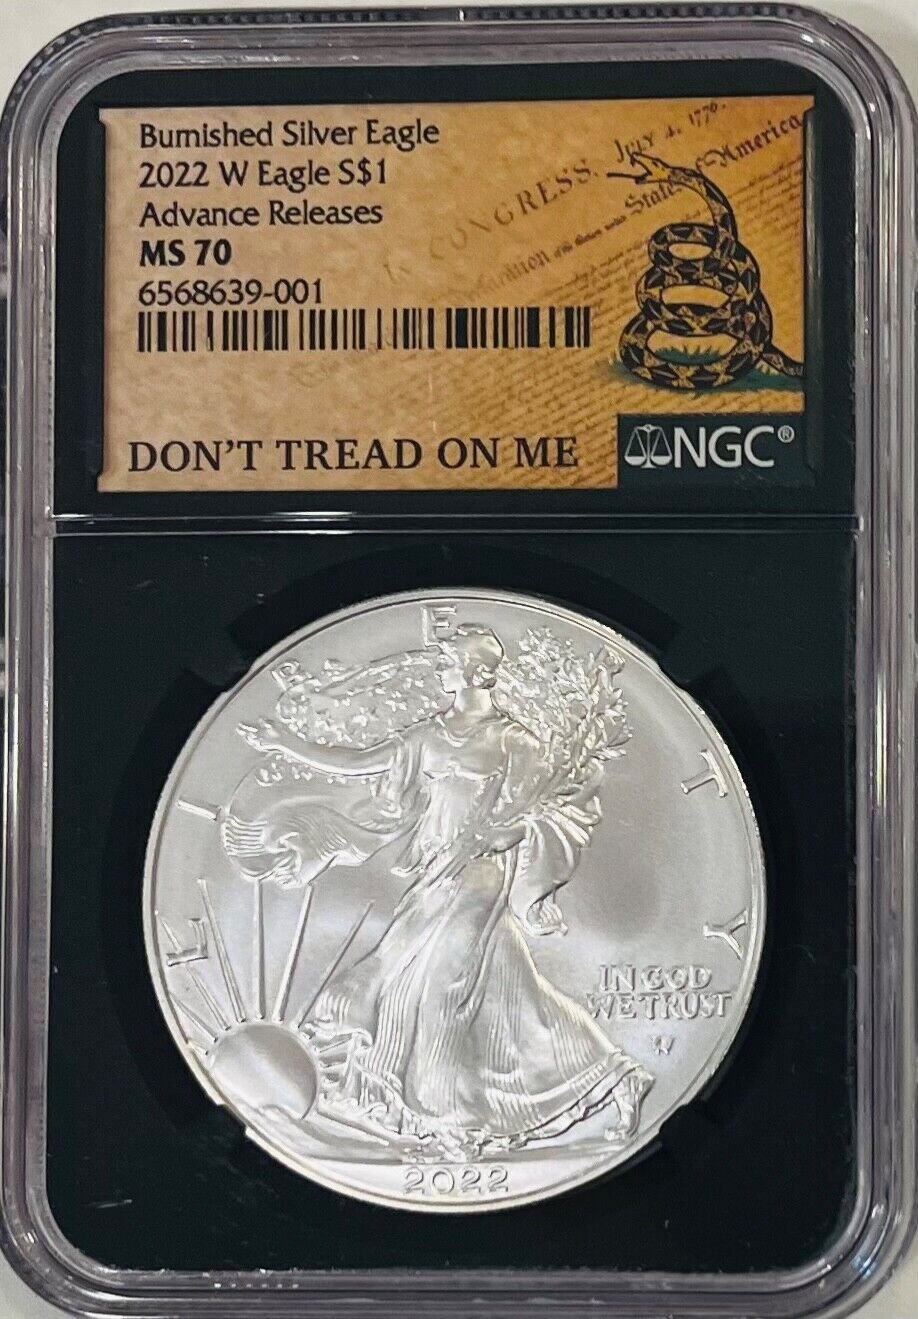 2022-W Burnished Silver Eagle - Don't Tread On Me  NGC MS70 ADVANCE RELEASES